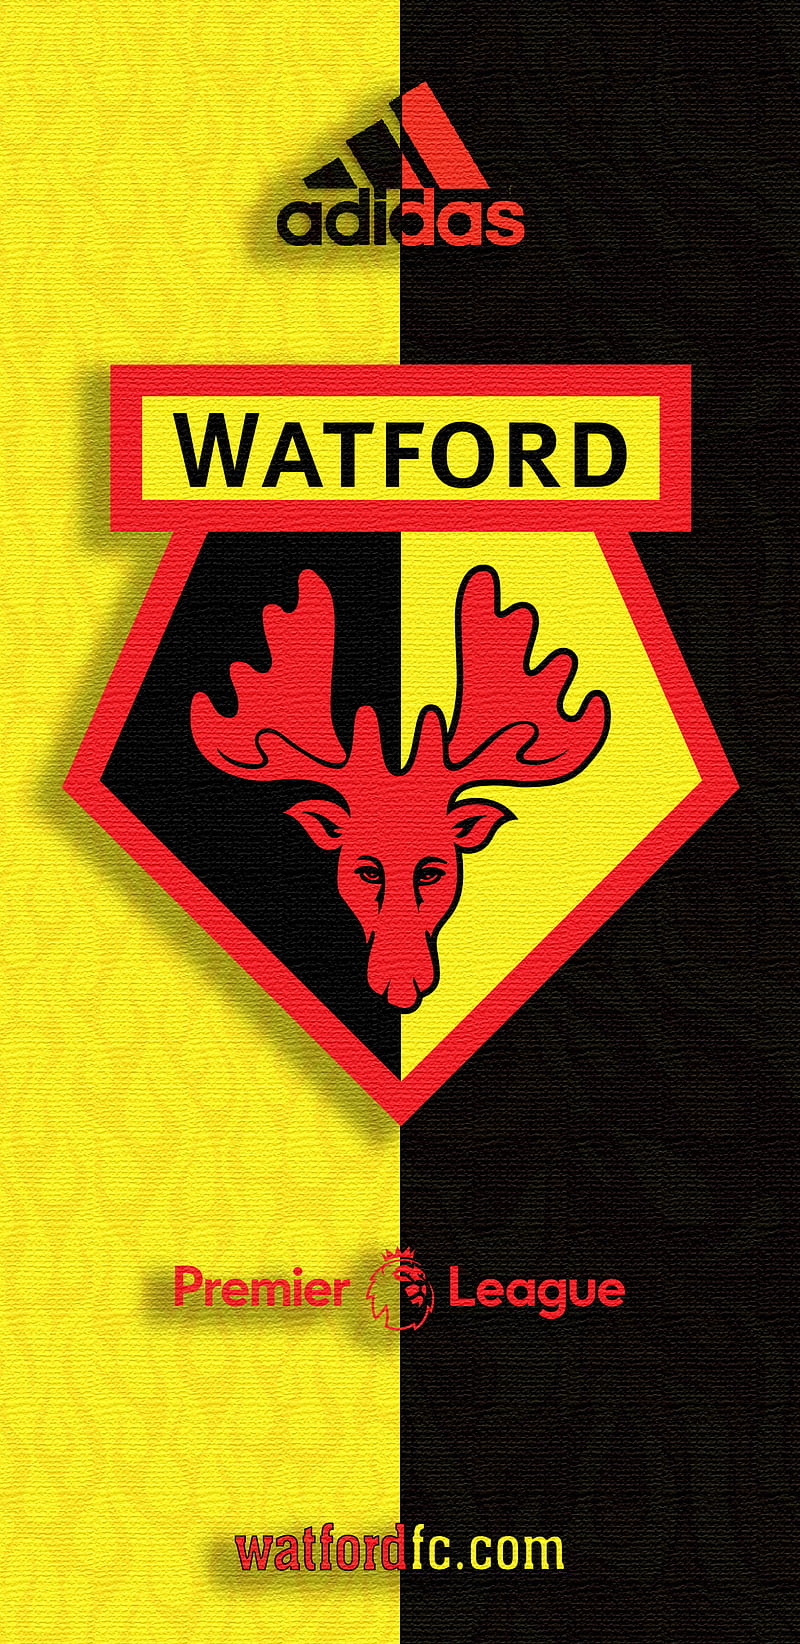 WATFORD NOTE 9, 1881, adidas, barclays, premier league, the golden boys, the hornets, the yellow army, HD phone wallpaper